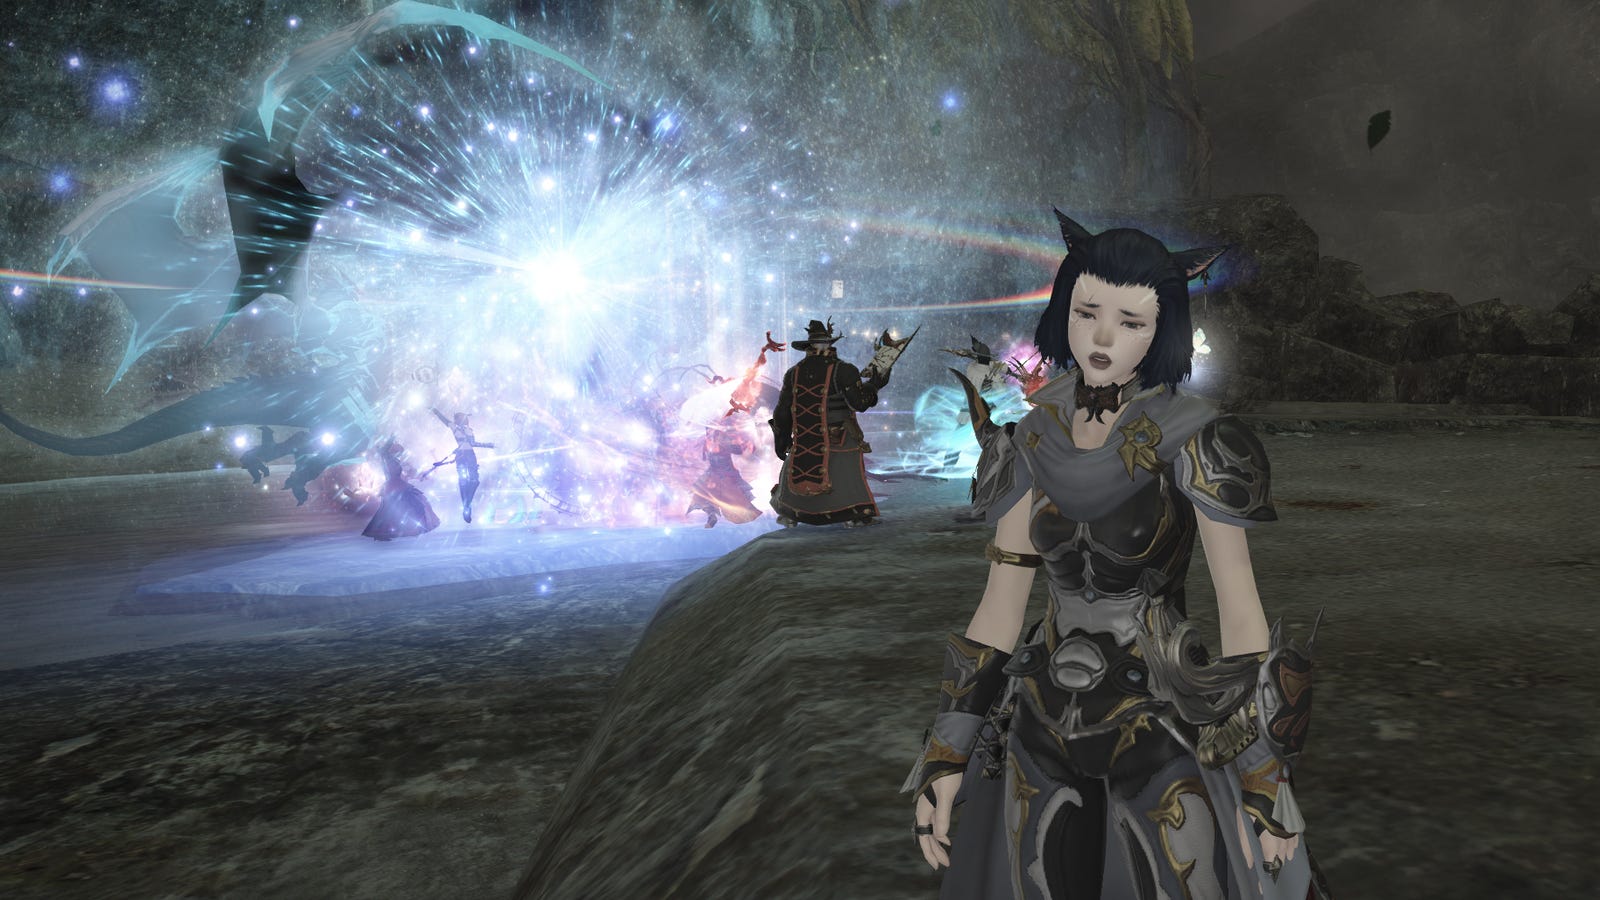 FFXIV female character standing in front with a magical blast in the background